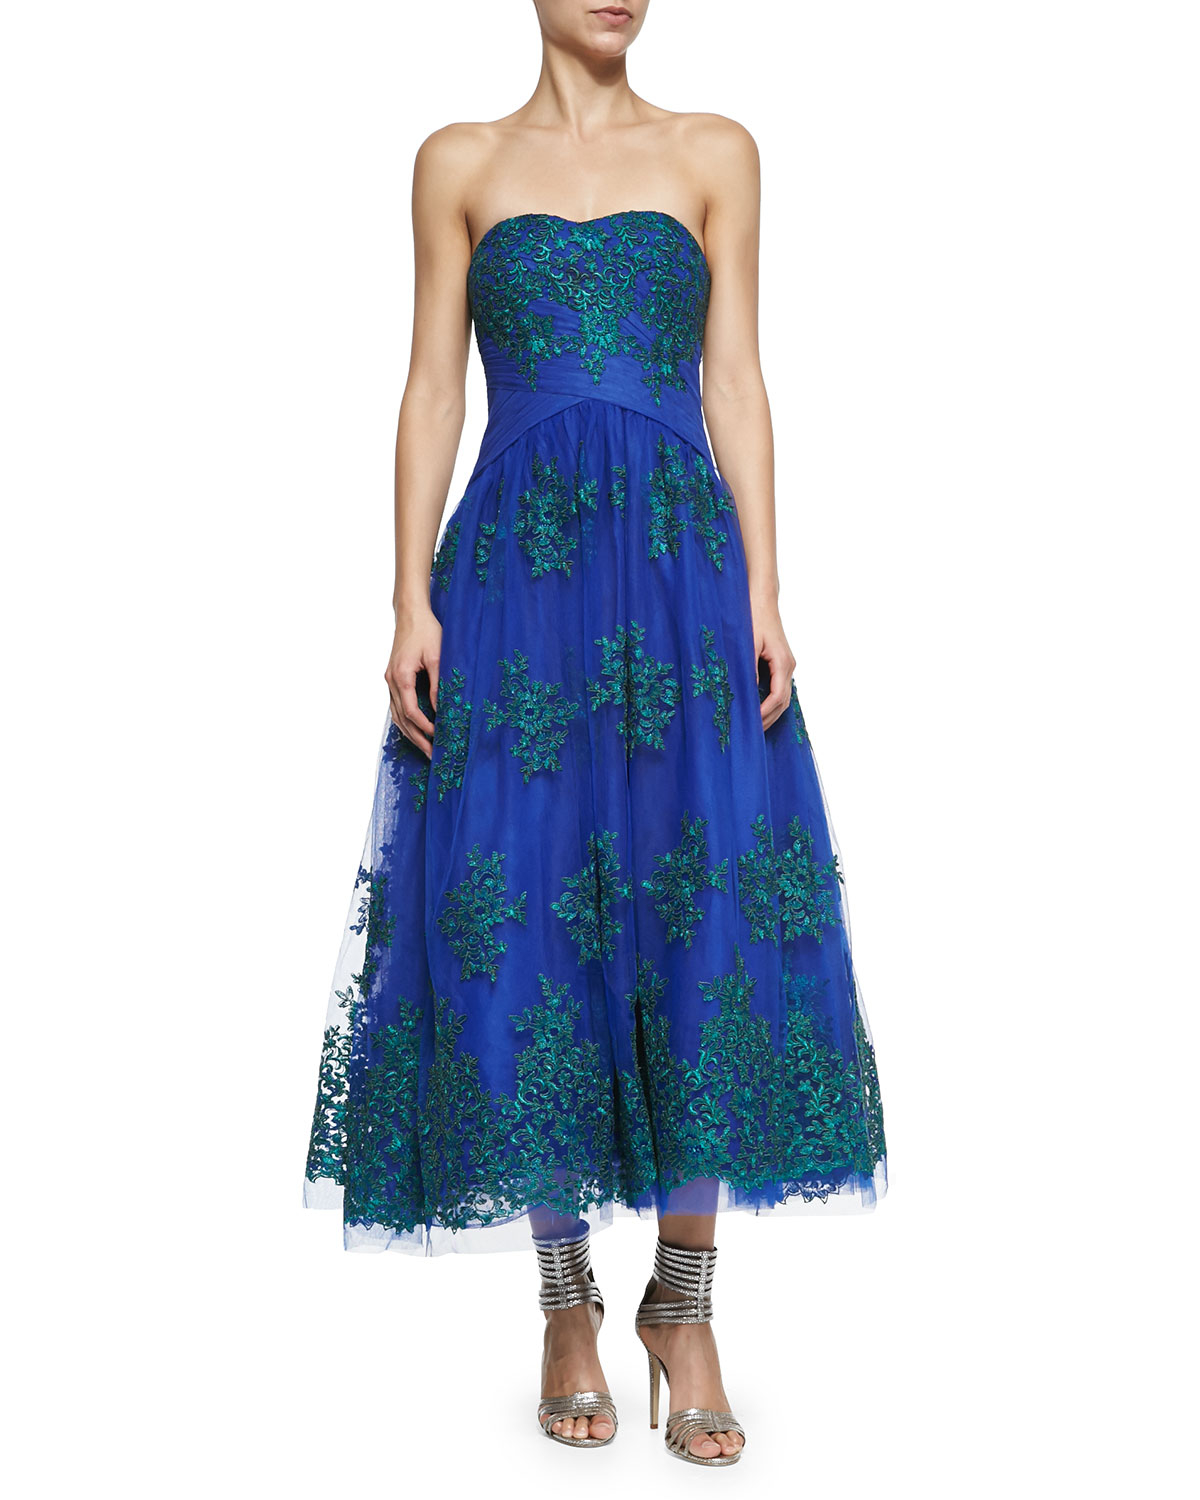 Lyst - Ml Monique Lhuillier Strapless Embroidered Tea-length Cocktail ...